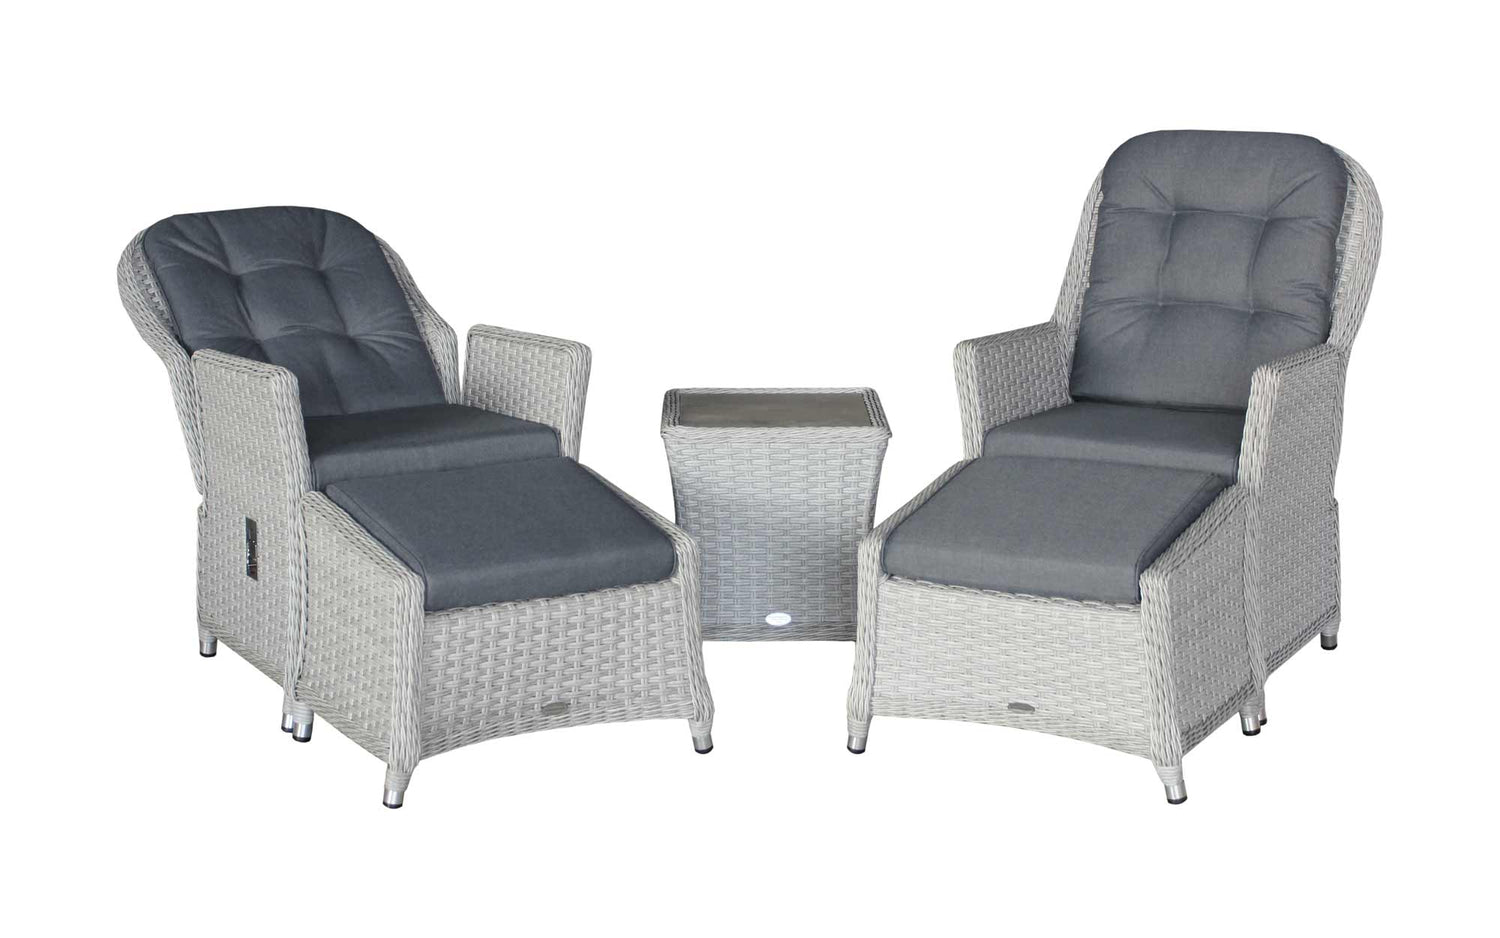 X24WWTCC2-Wentworth-Recliner-Set-with-2-Footstools-&-Side-Table--down-recliner-22.jpg